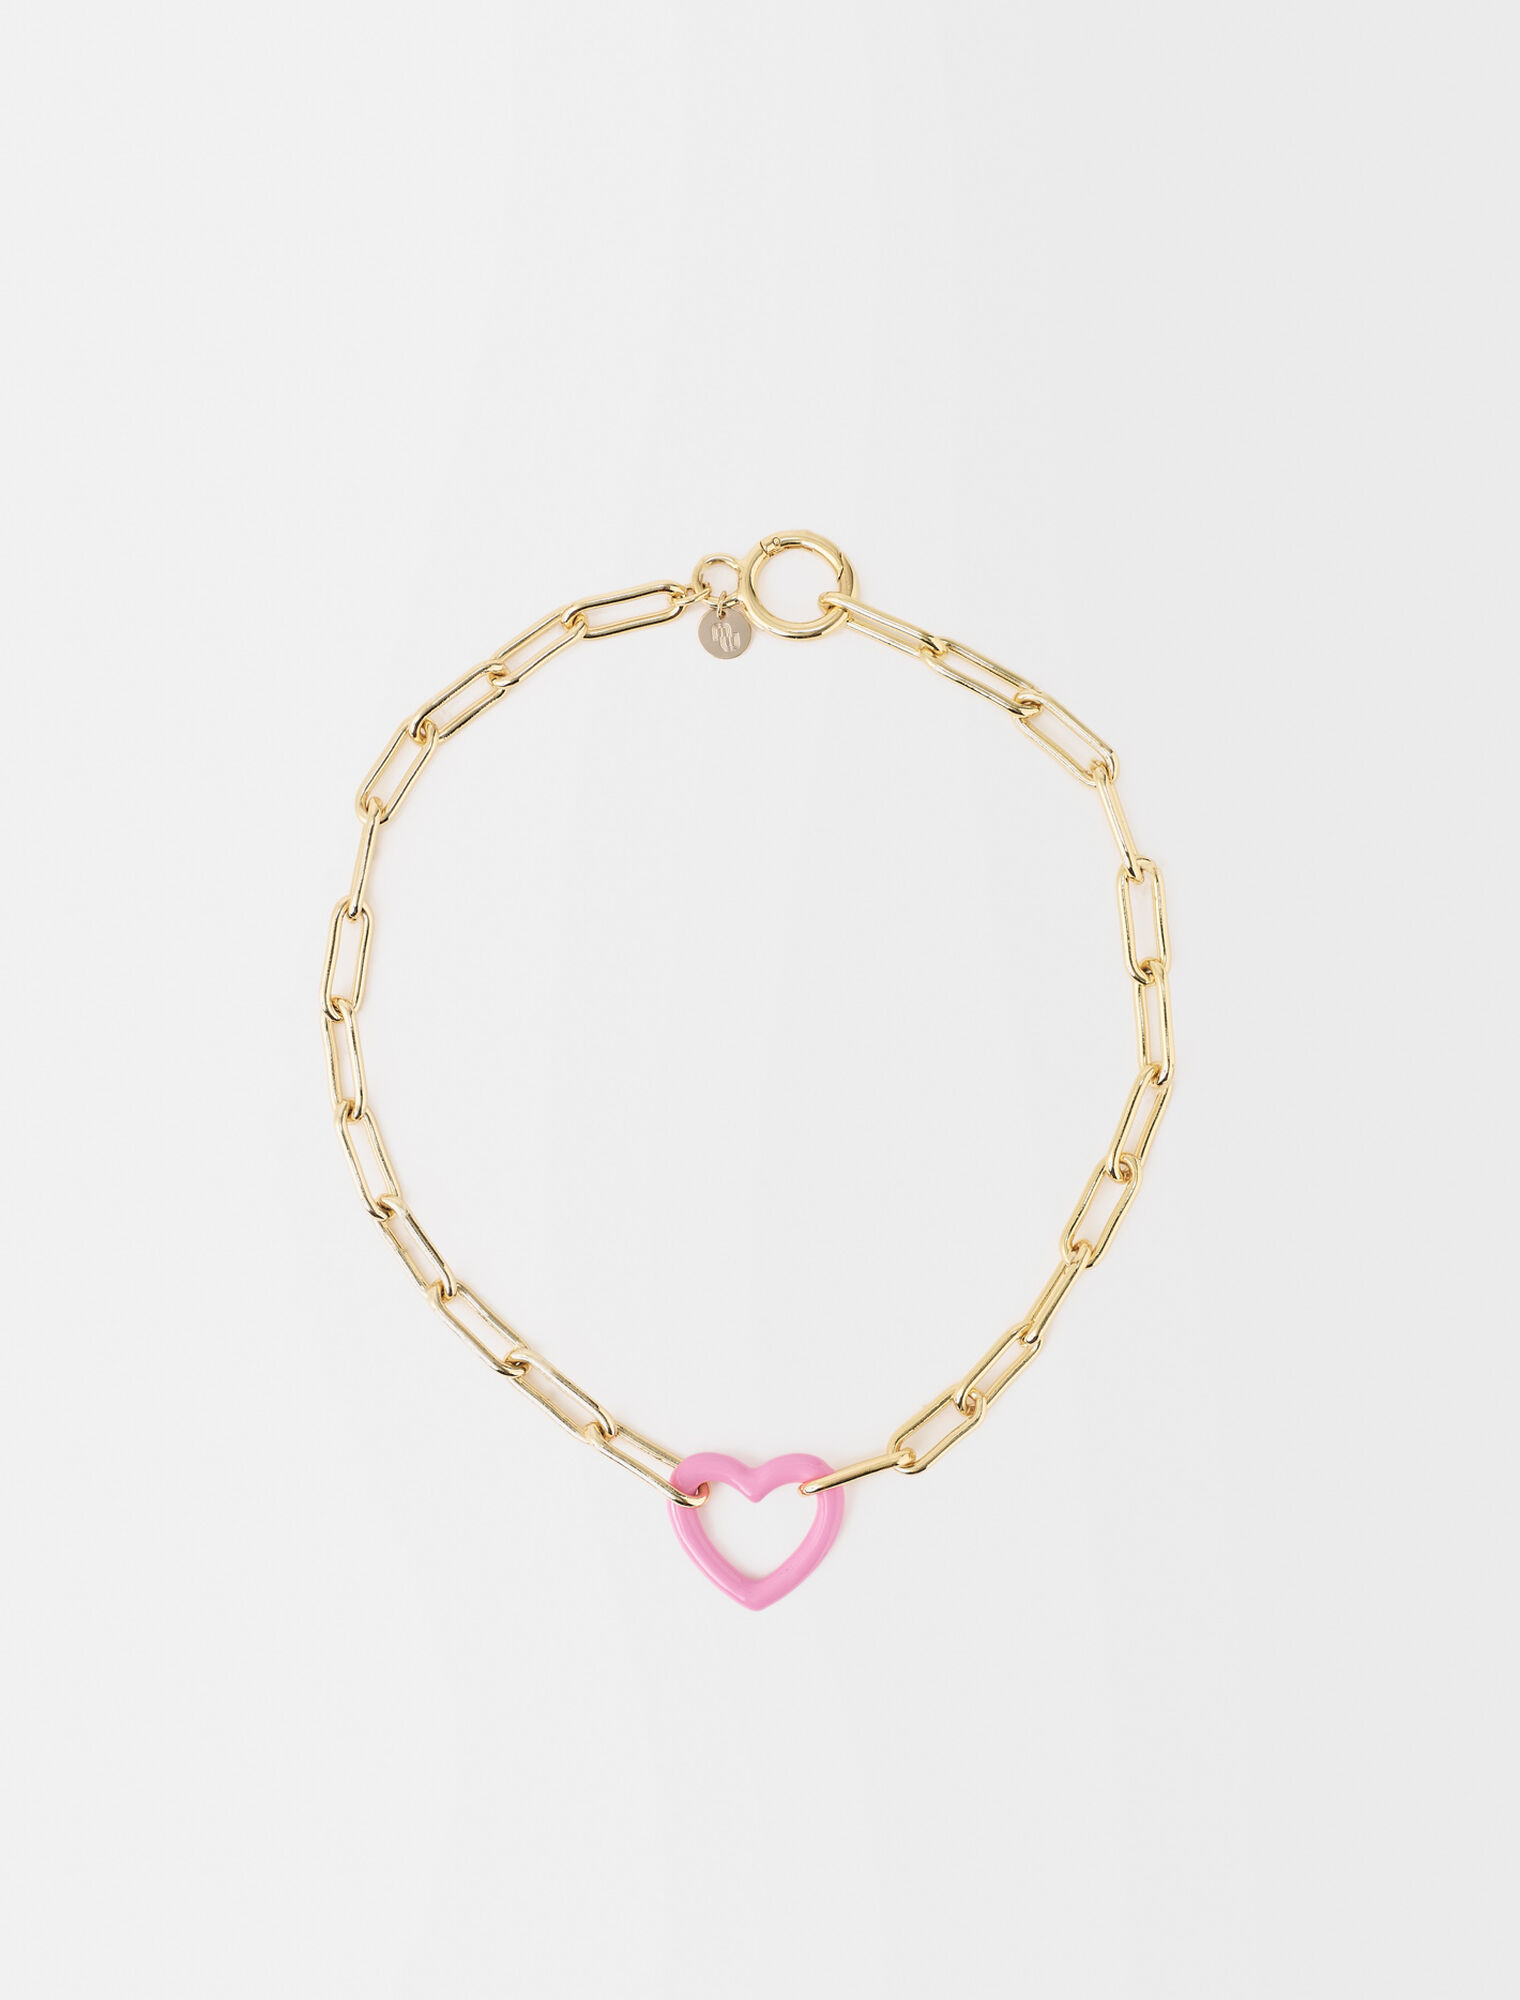 Yellow heart necklace